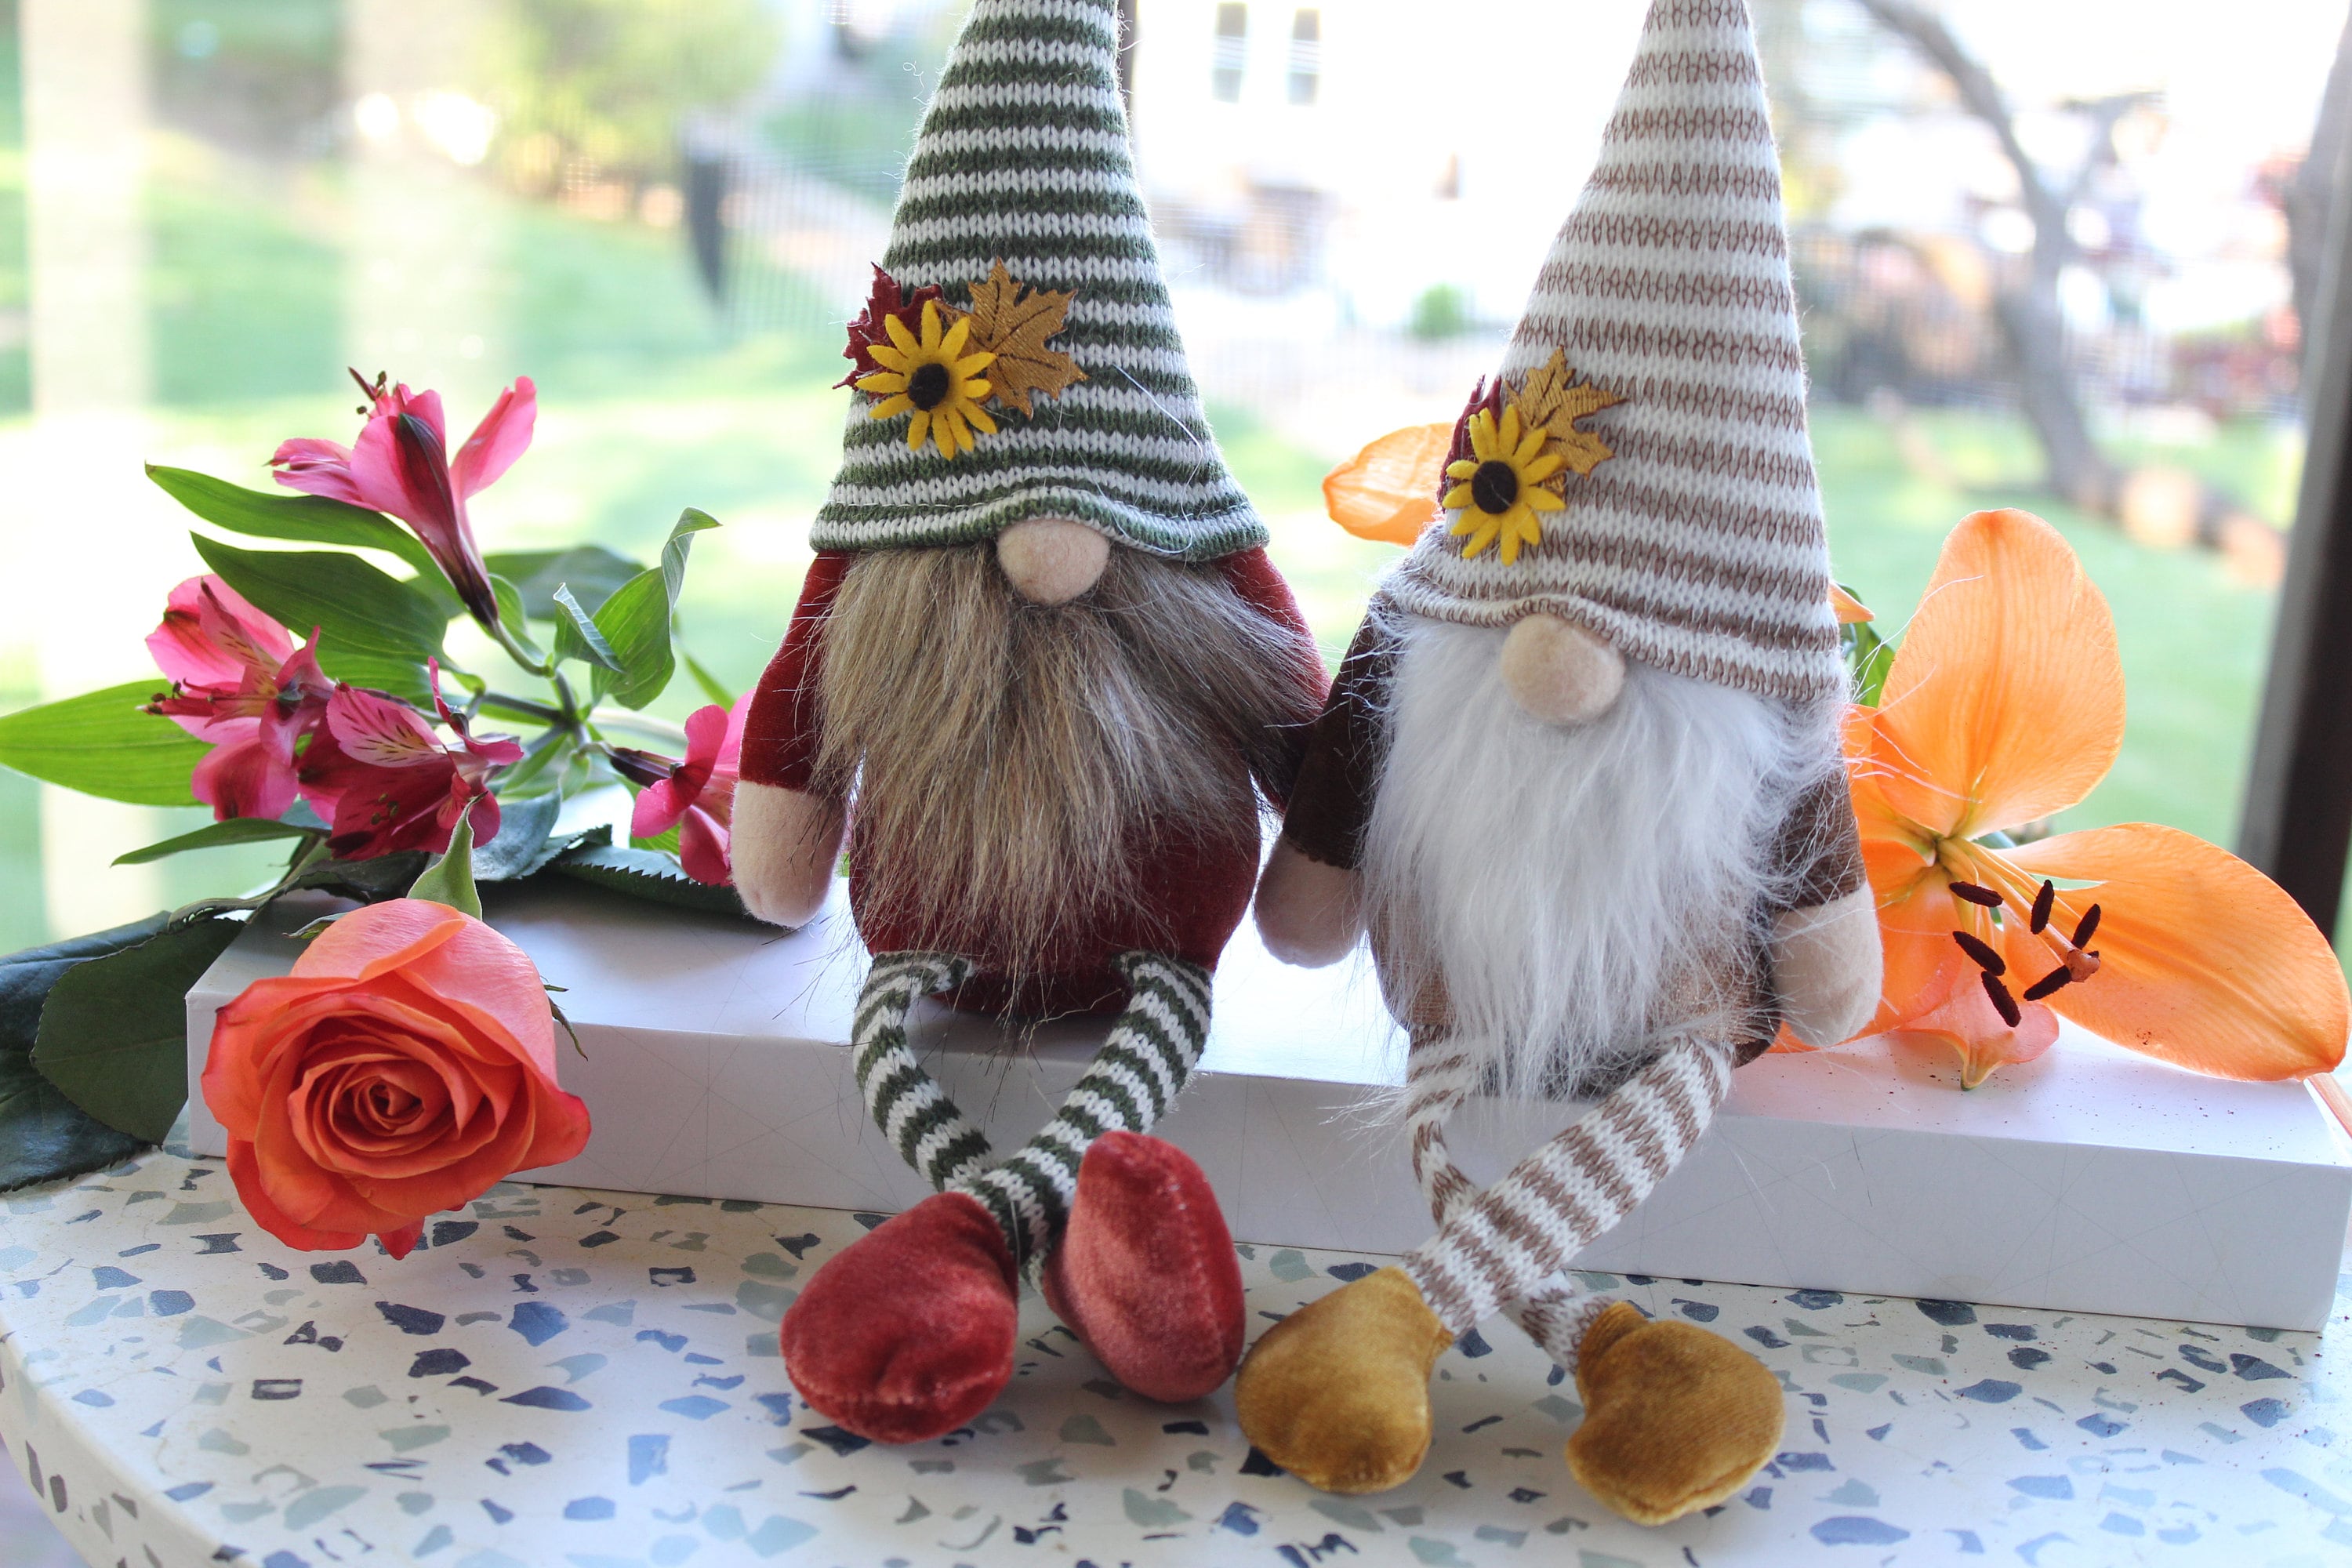 Pair of Fall Gnomes, Thanksgiving Gnomes, Autumn Gnomes for home, Adorable Handmade Gnomes, Scandinavian Nordic gnome - Tiered tray decor